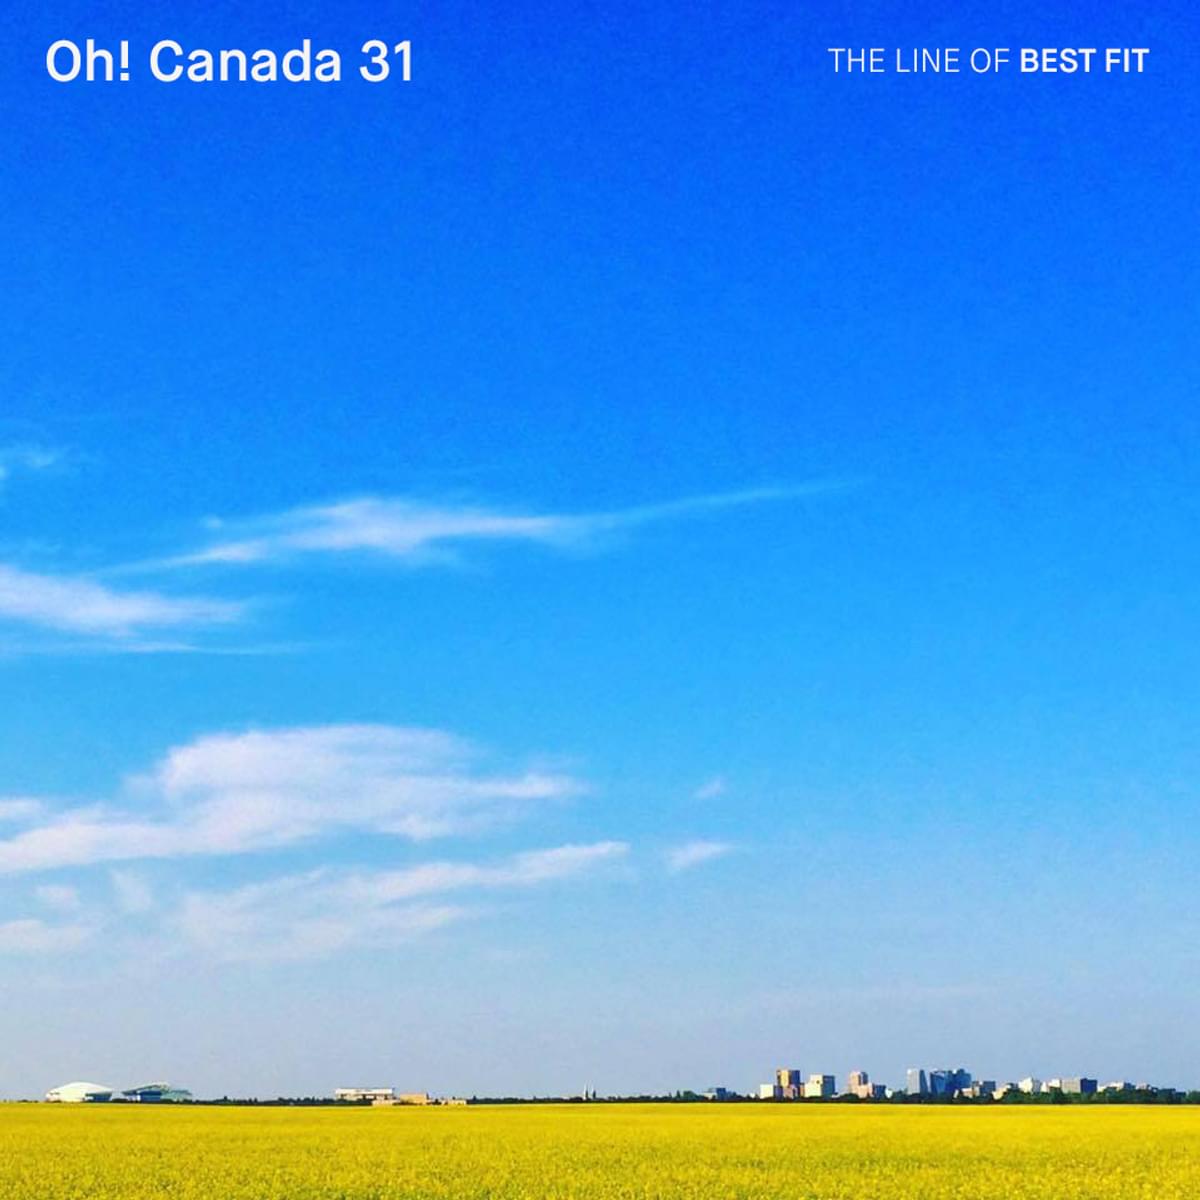 Oh Canada 31 Text